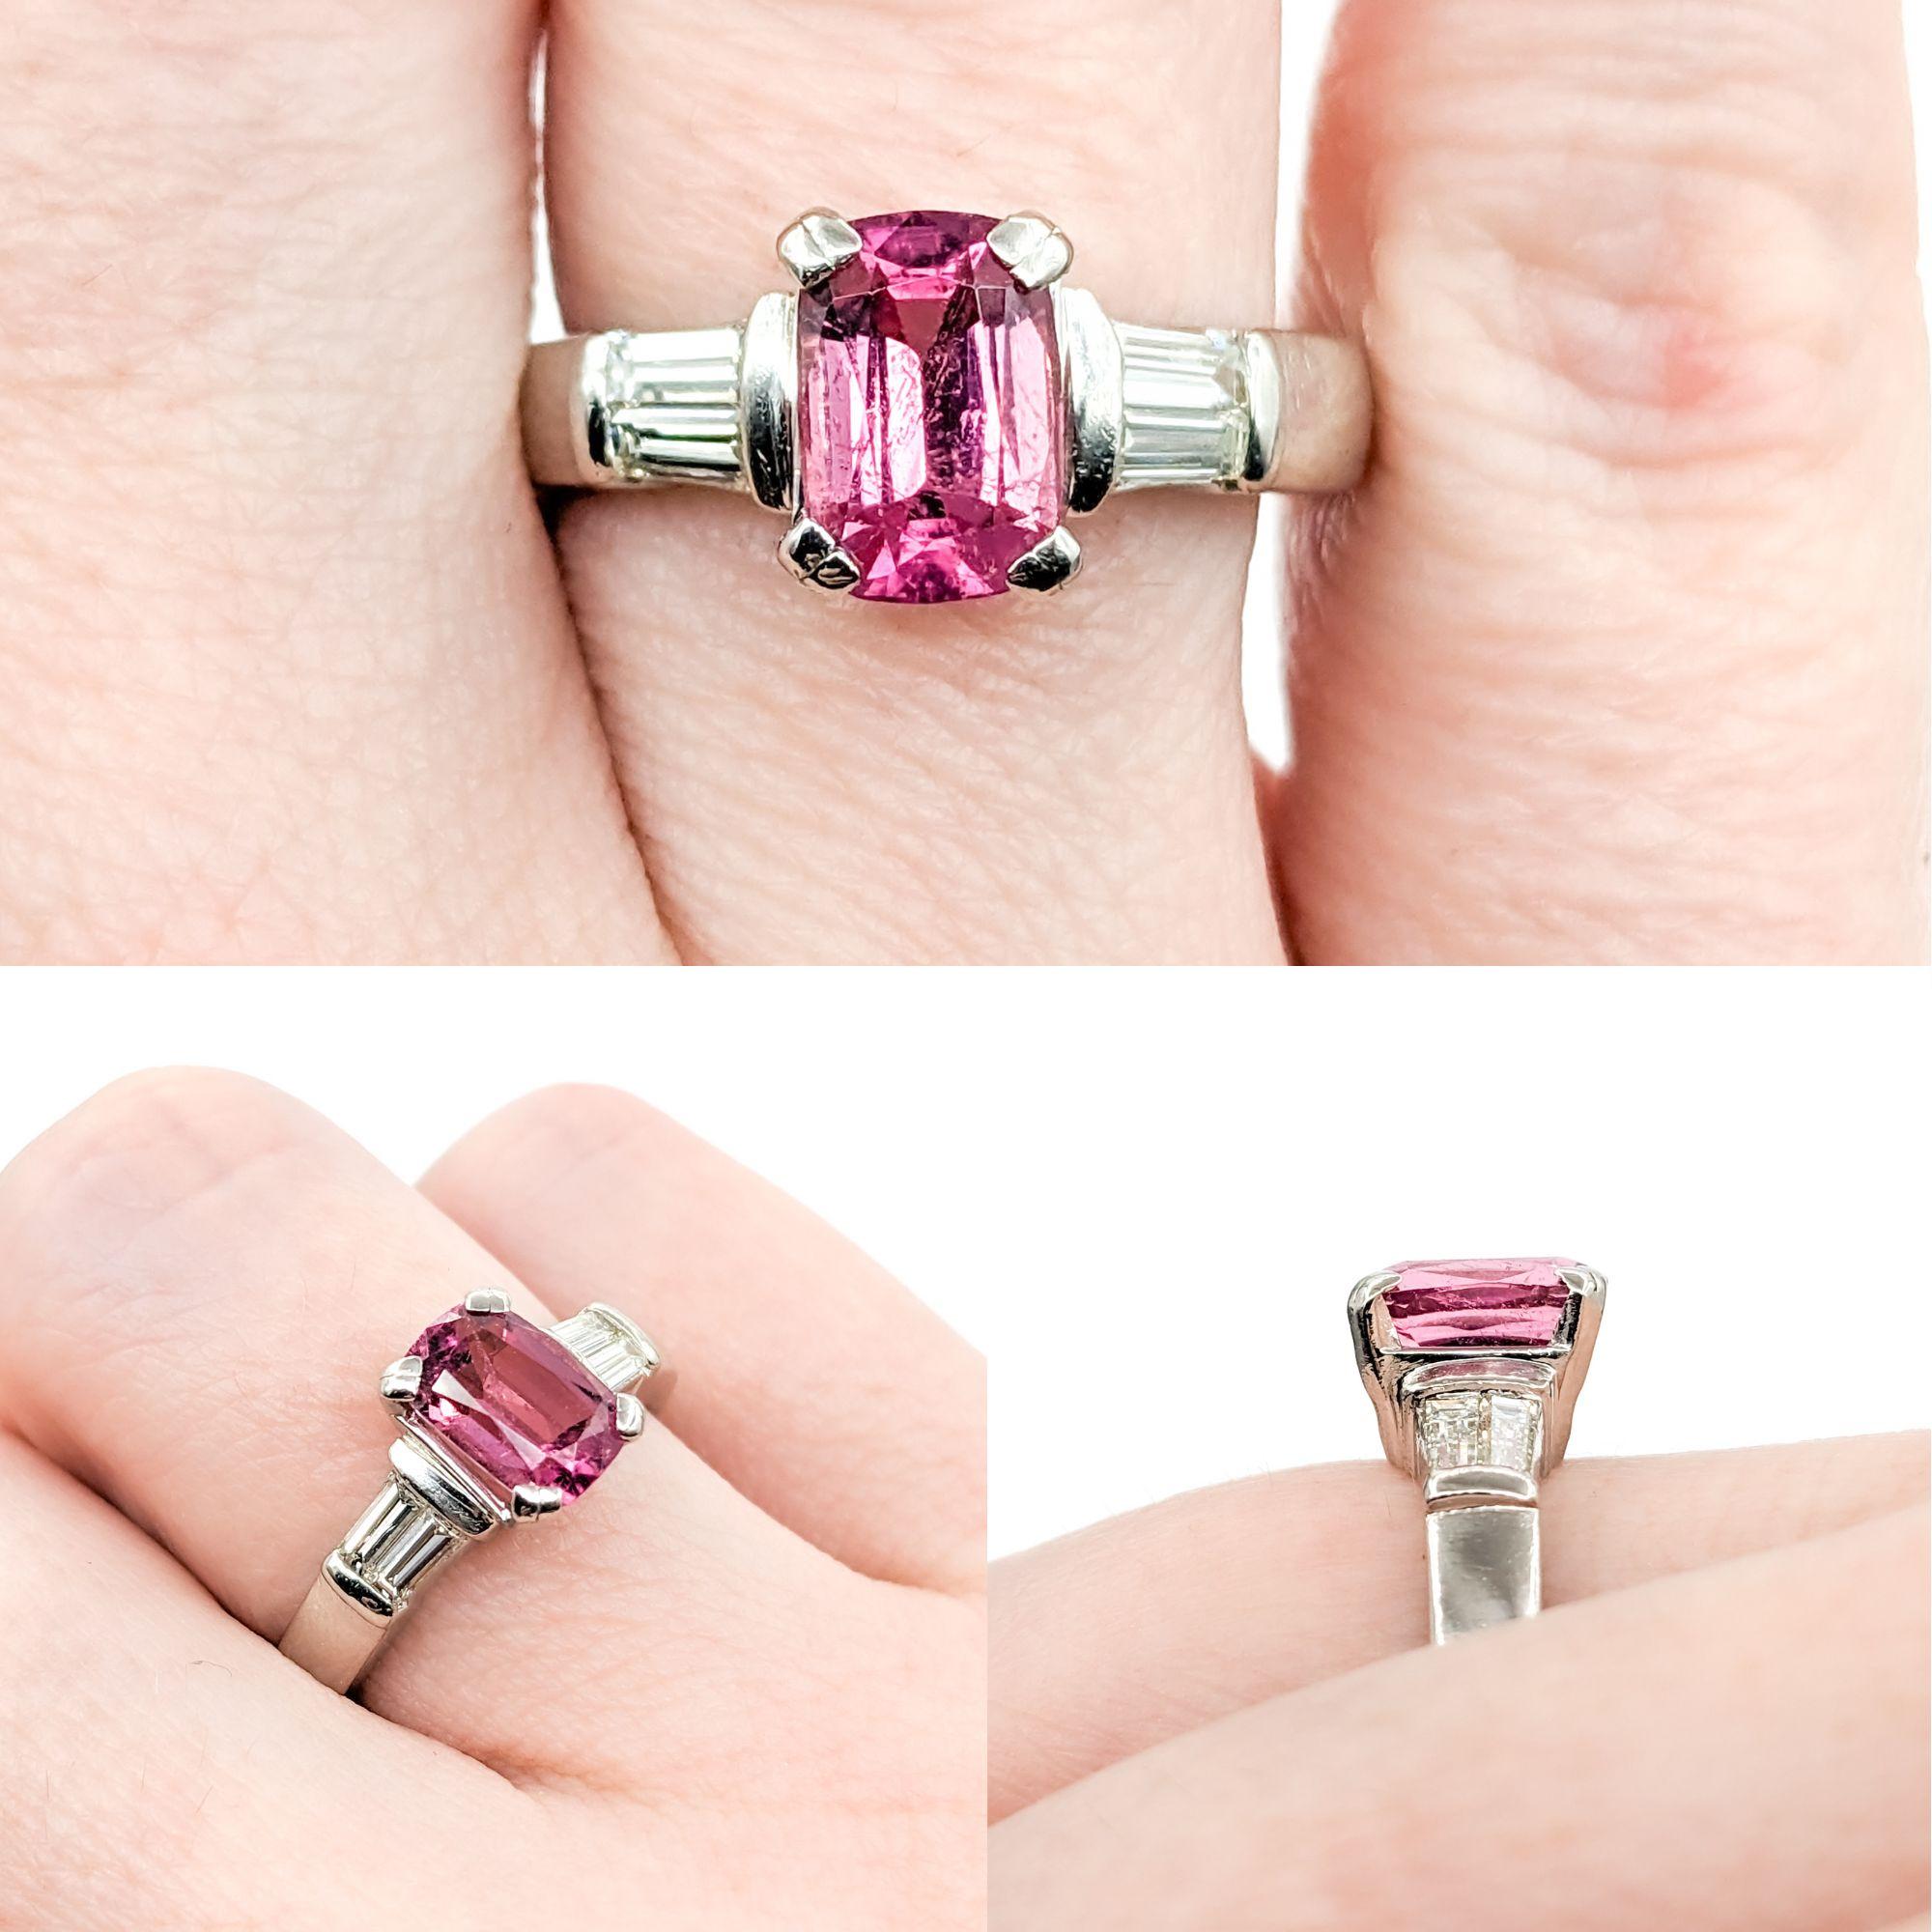 Pink Tourmaline & Baguette Diamond Ring in Platinum

Introducing this beautiful Pink Tourmaline ring crafted in 950 Platinum, adorned with .33ctw Baguette Diamonds. The 1.35ct Tourmaline has a saturated Pink color that pops against the diamonds. The